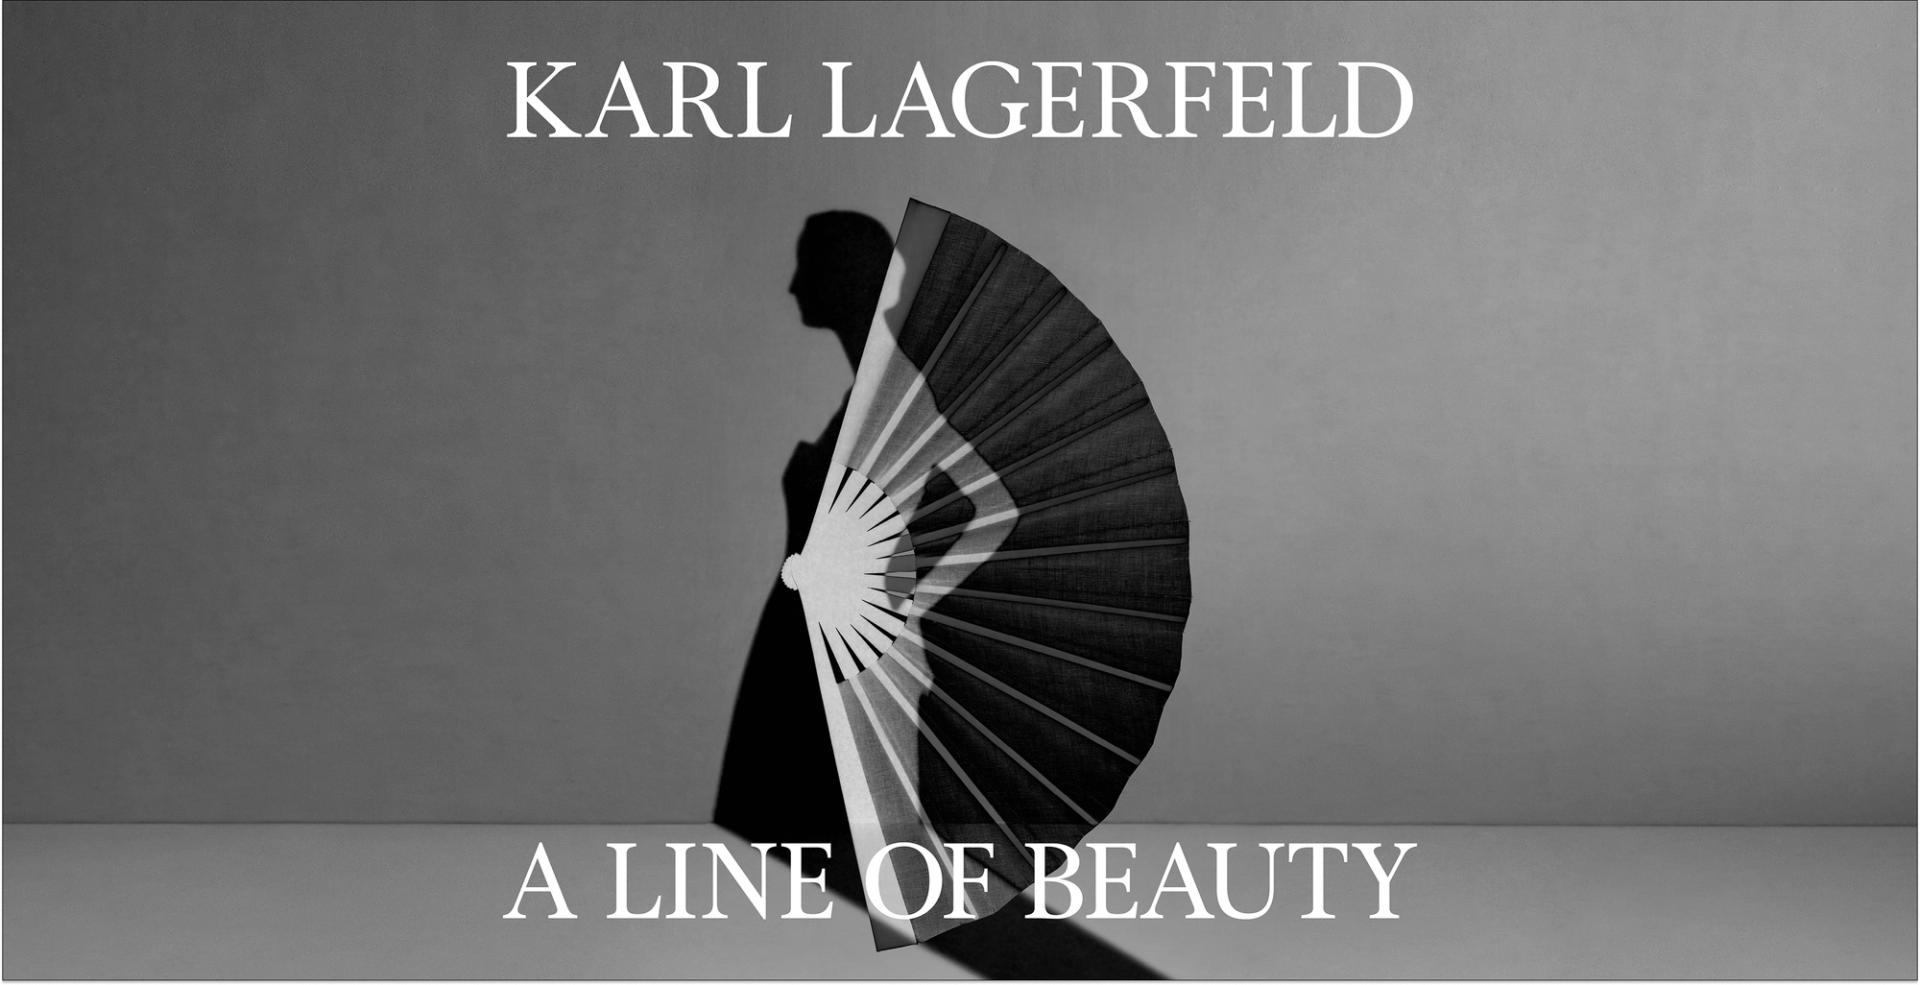 Karl Lagerfeld: A Line of Beauty exhibit poster featuring a woman with a fan in black and white scale